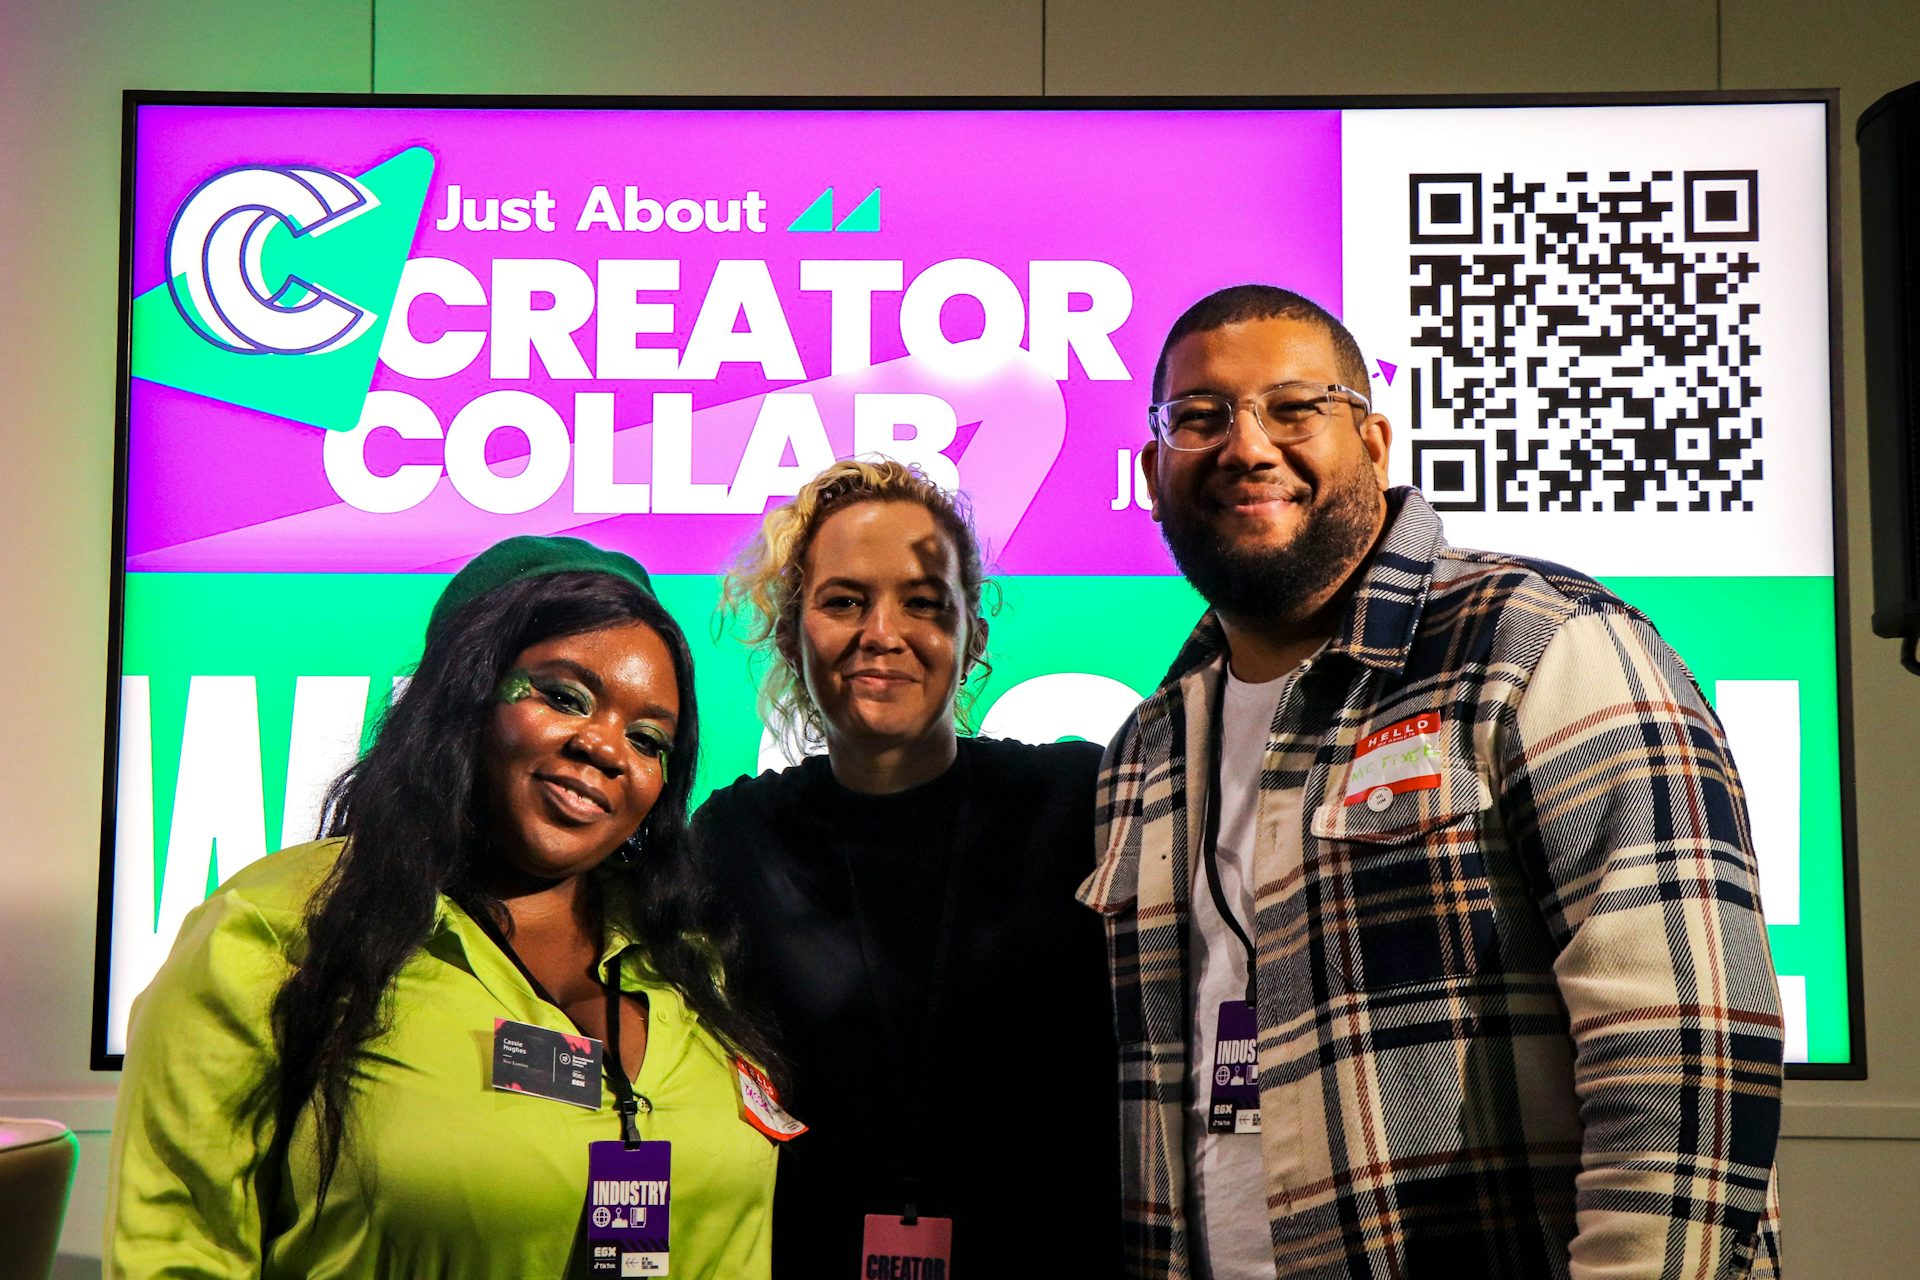 Takeaways from the Just About Creator Collab at EGX London